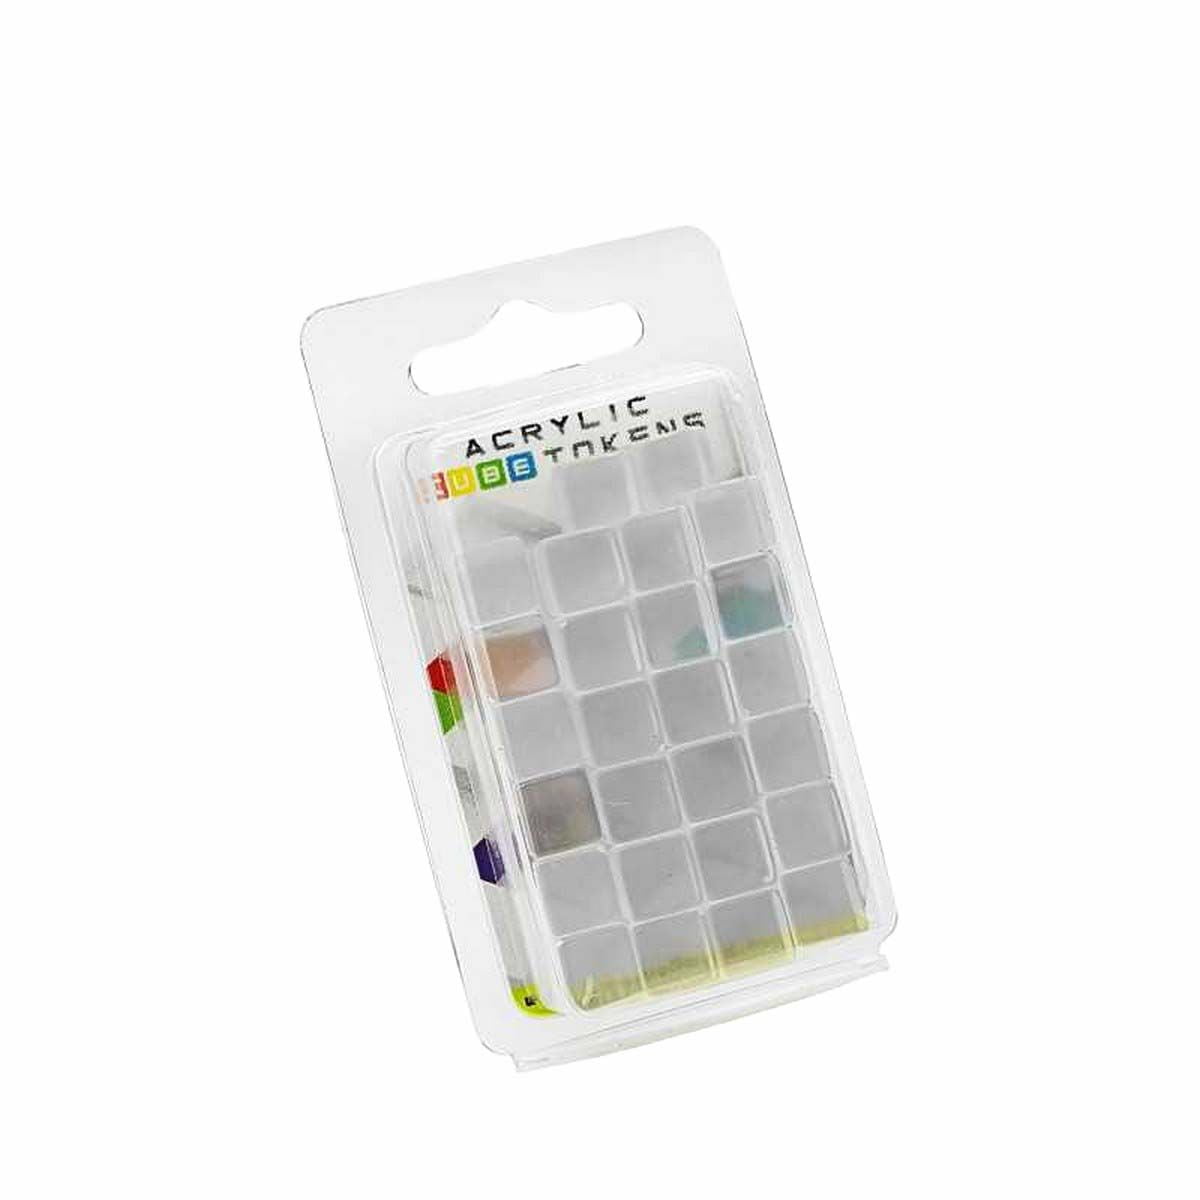 Gaming Tokens - Transparent Cubes 10mm